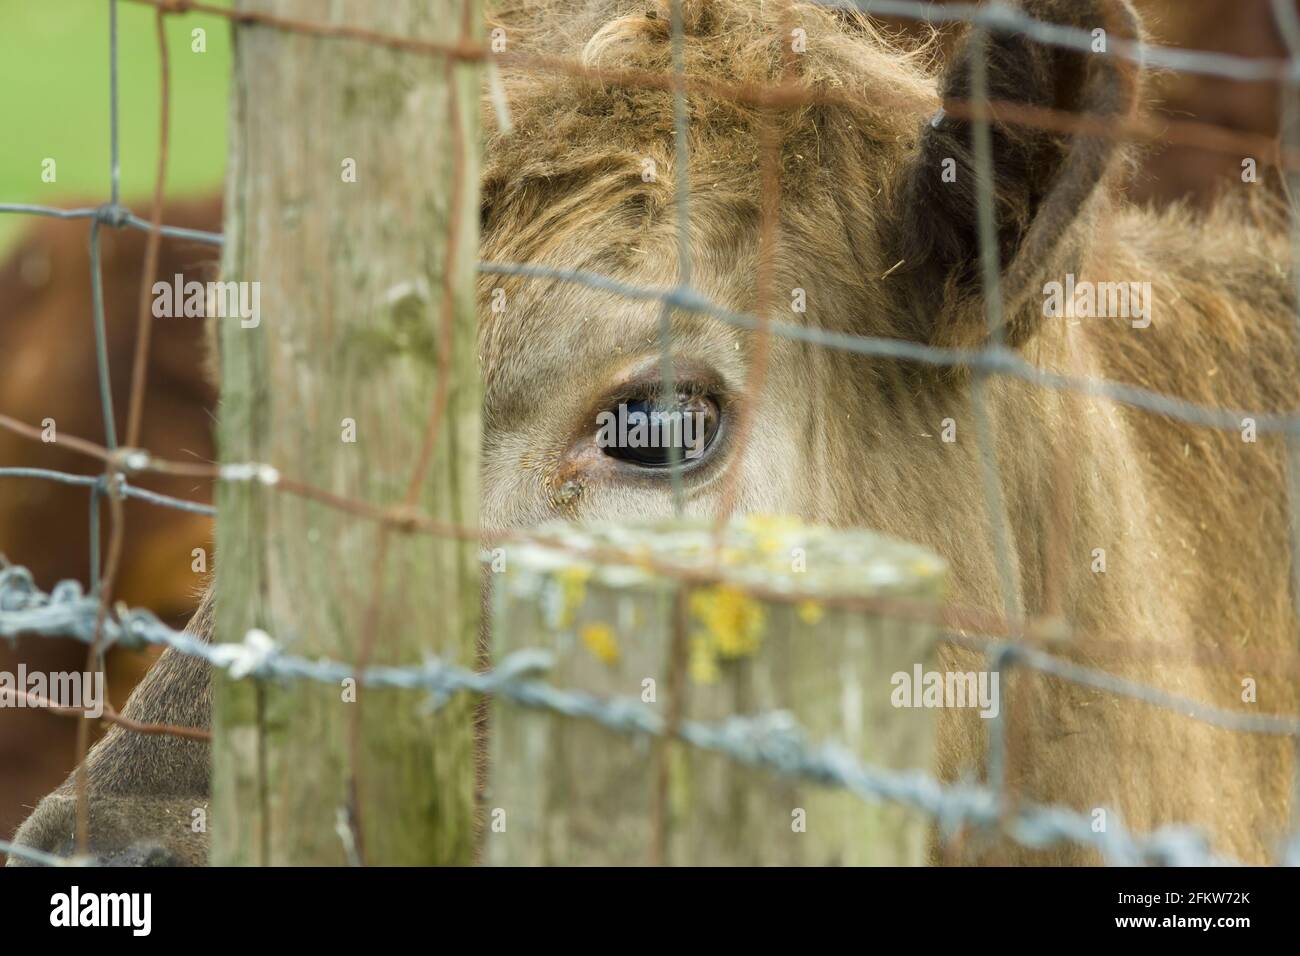 A young calf with a sad and forlorn expression staring through a wire stock fence on a dairy farm in the UK Stock Photo